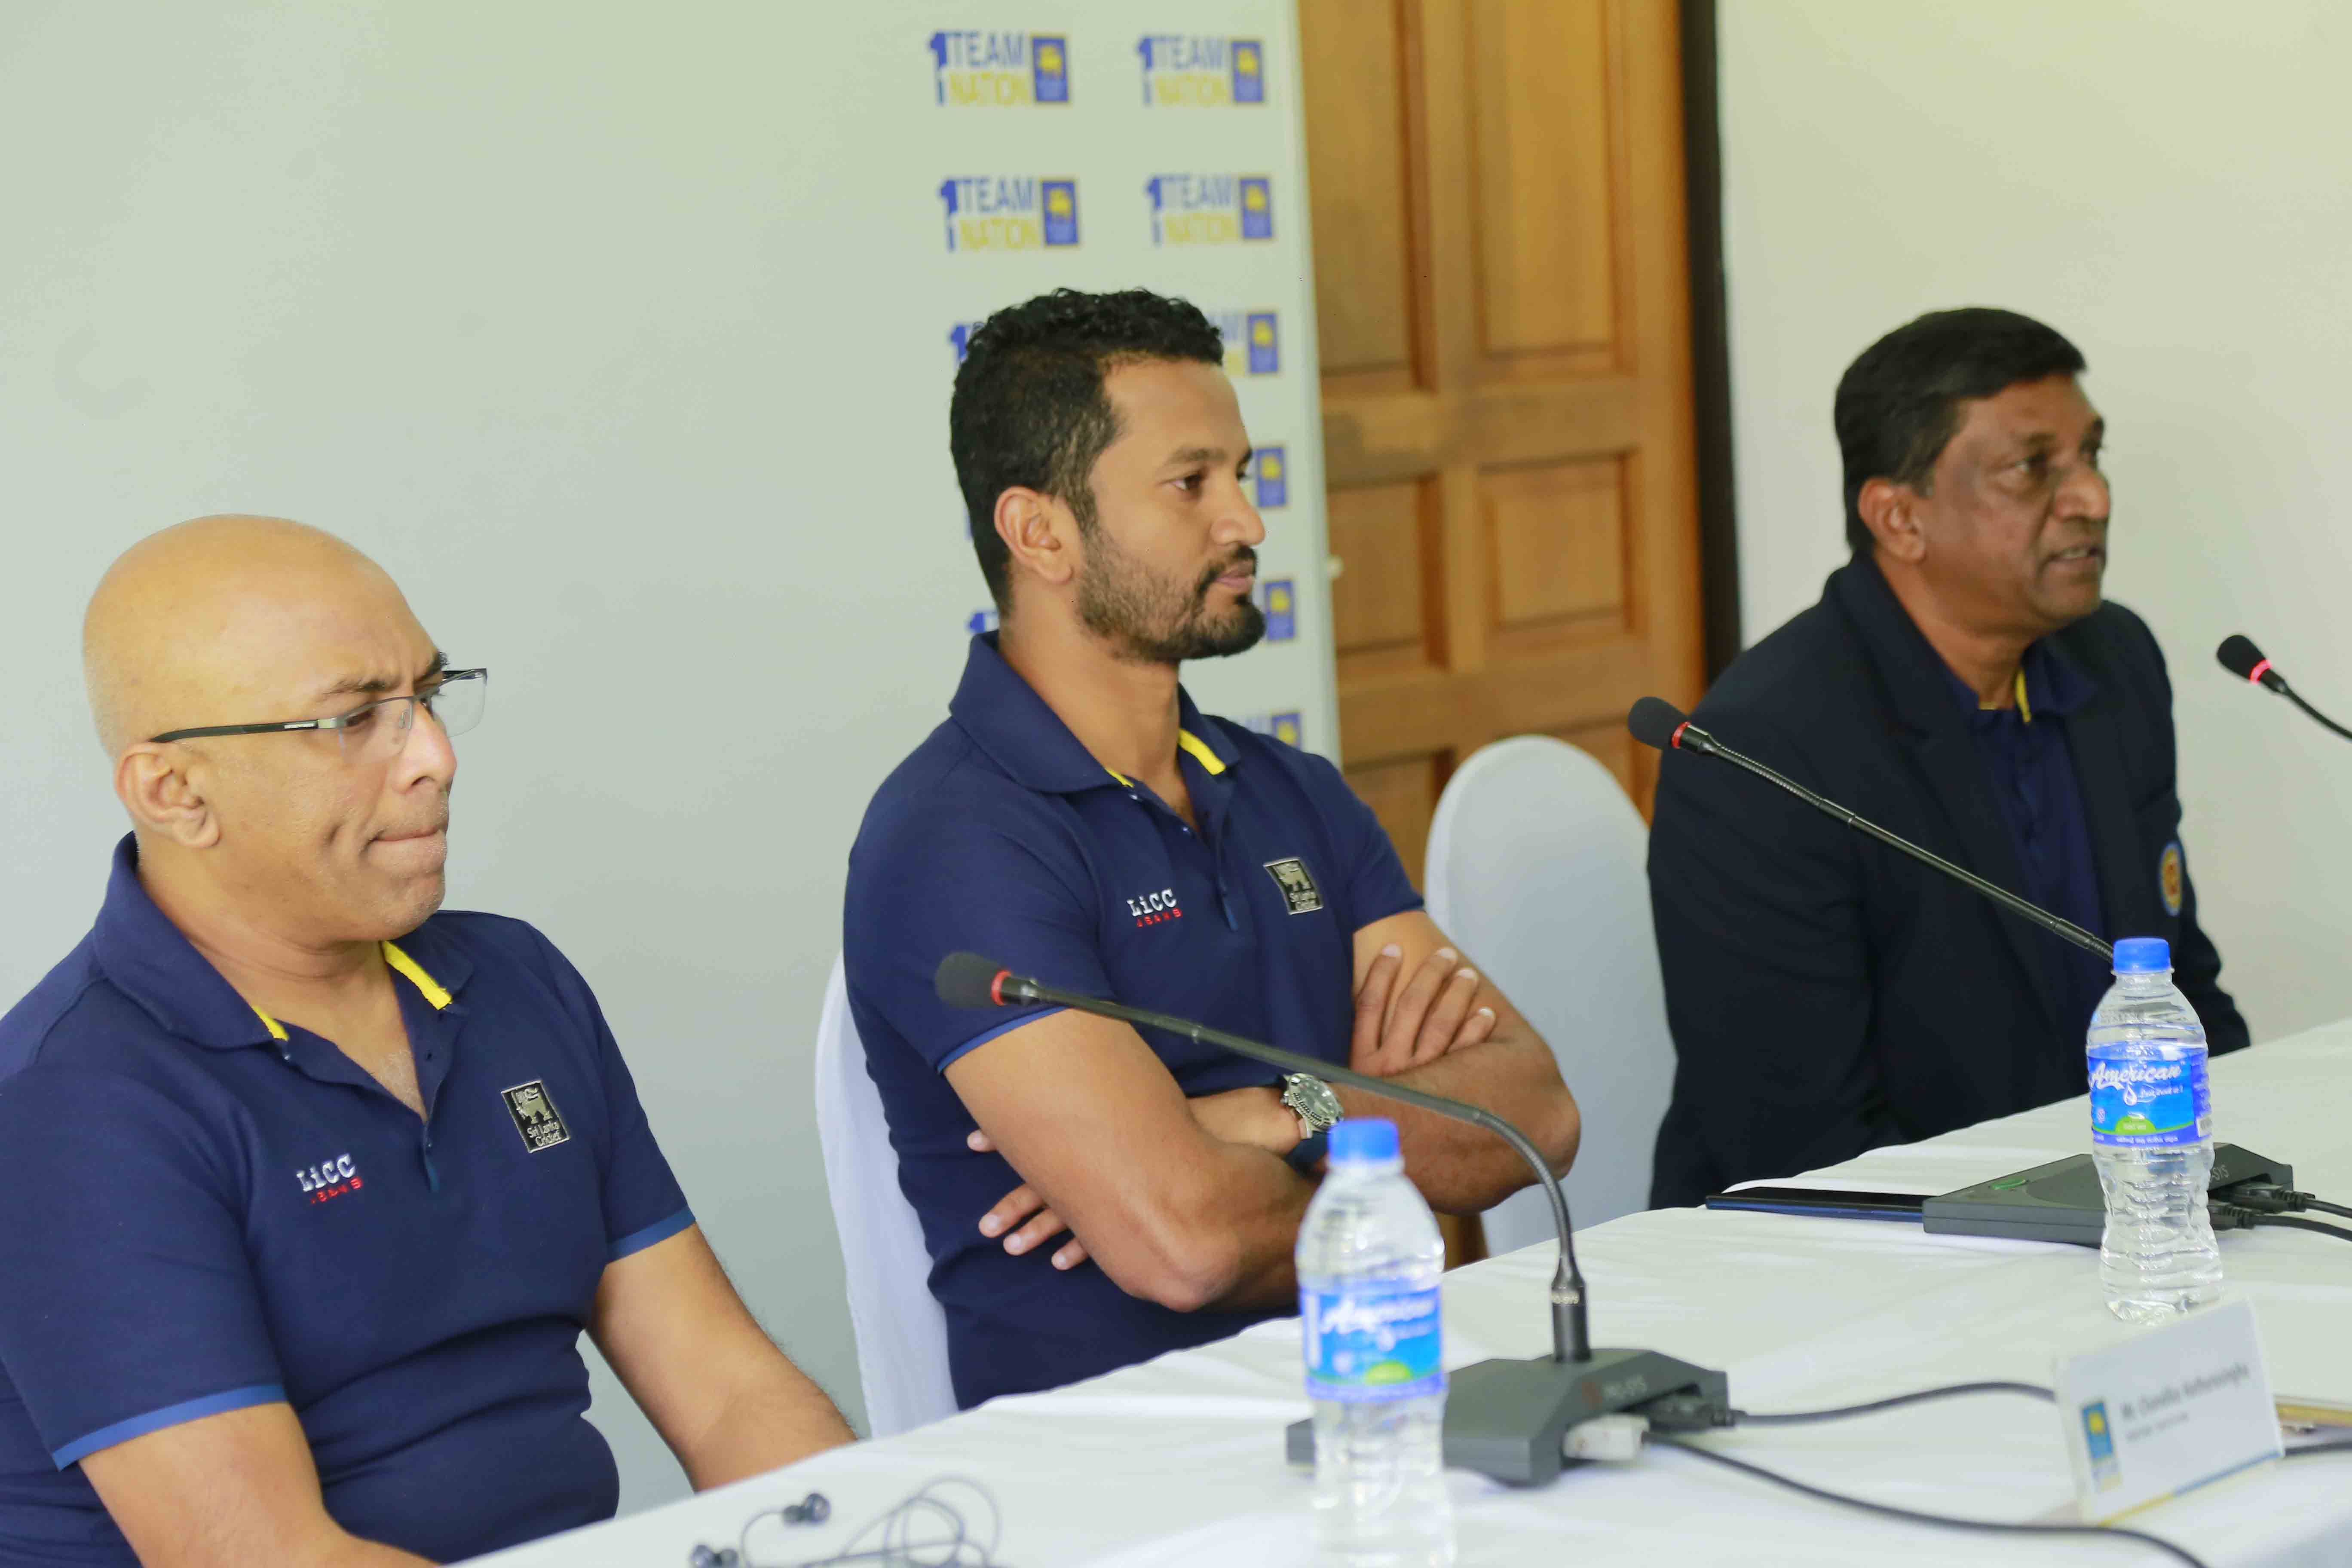 Sri Lanka’s performance at world cup was overly satisfying – Chief Selector/Manager Asantha de Mel